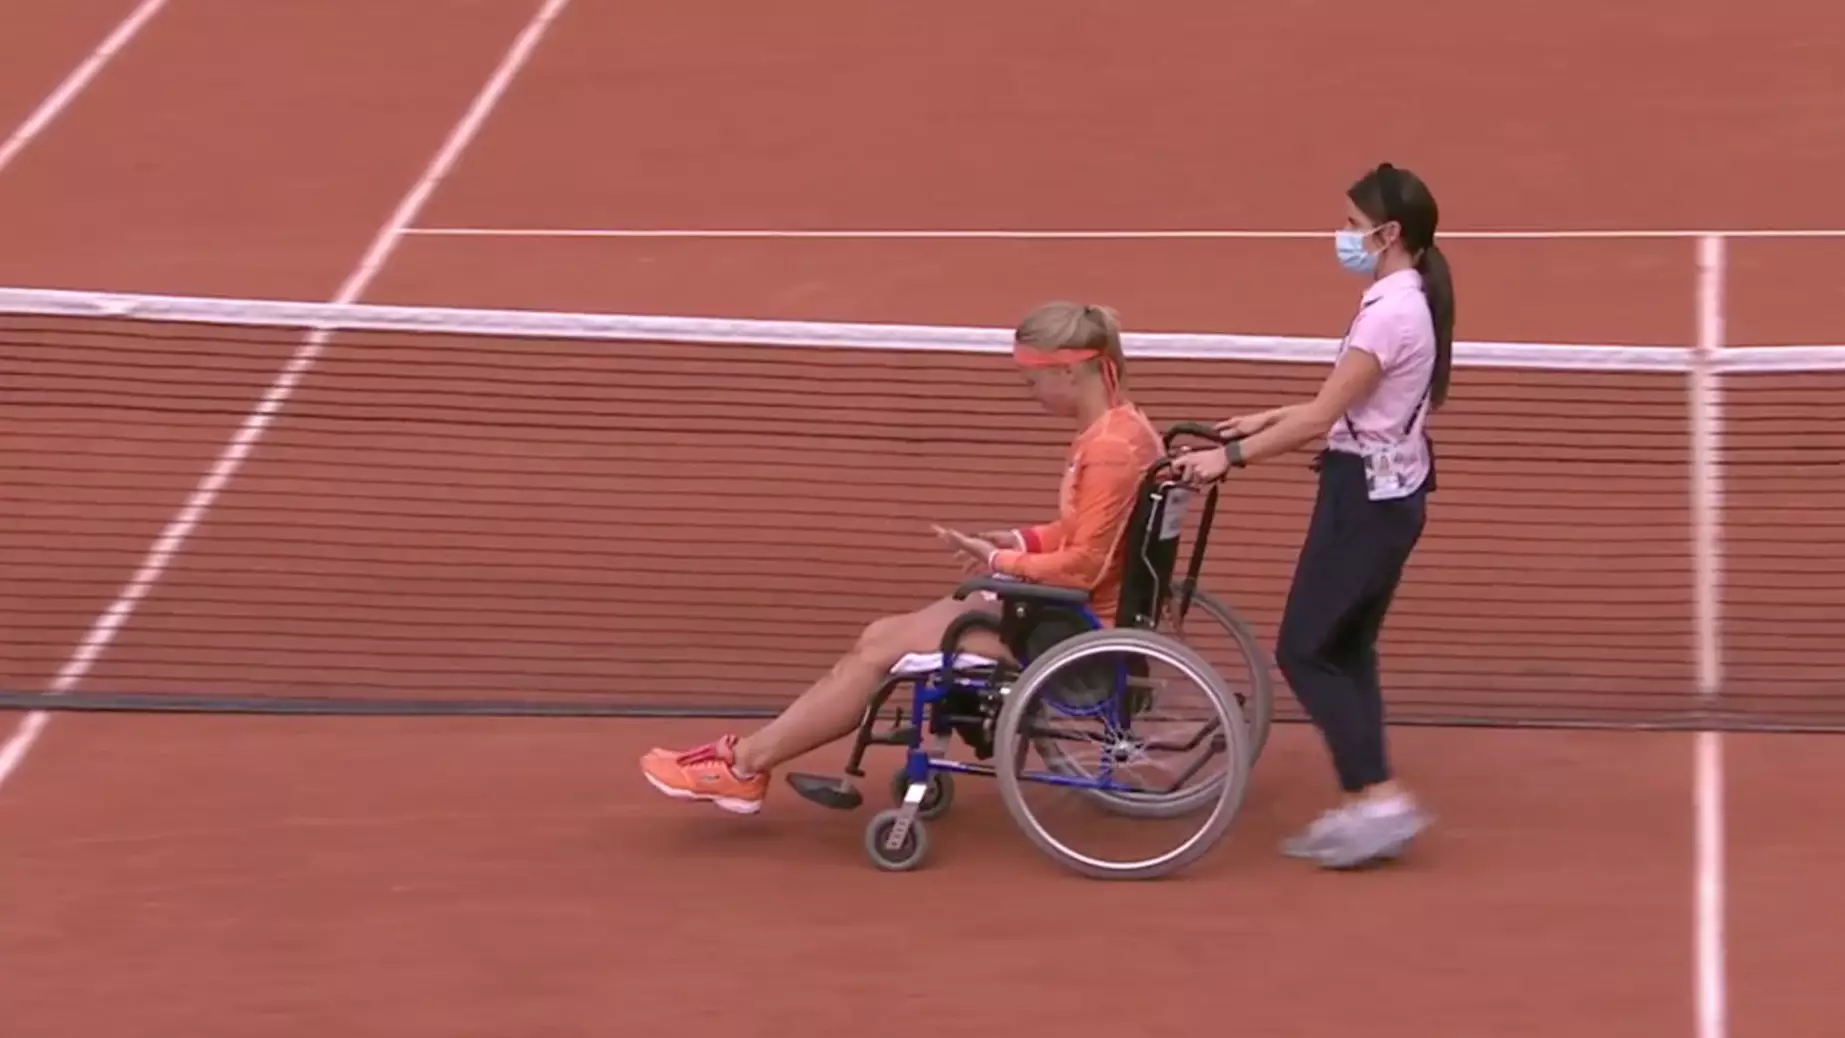 Kiki Bertens Accused Of Faking An Injury After Being Carted Off Court In A Wheelchair